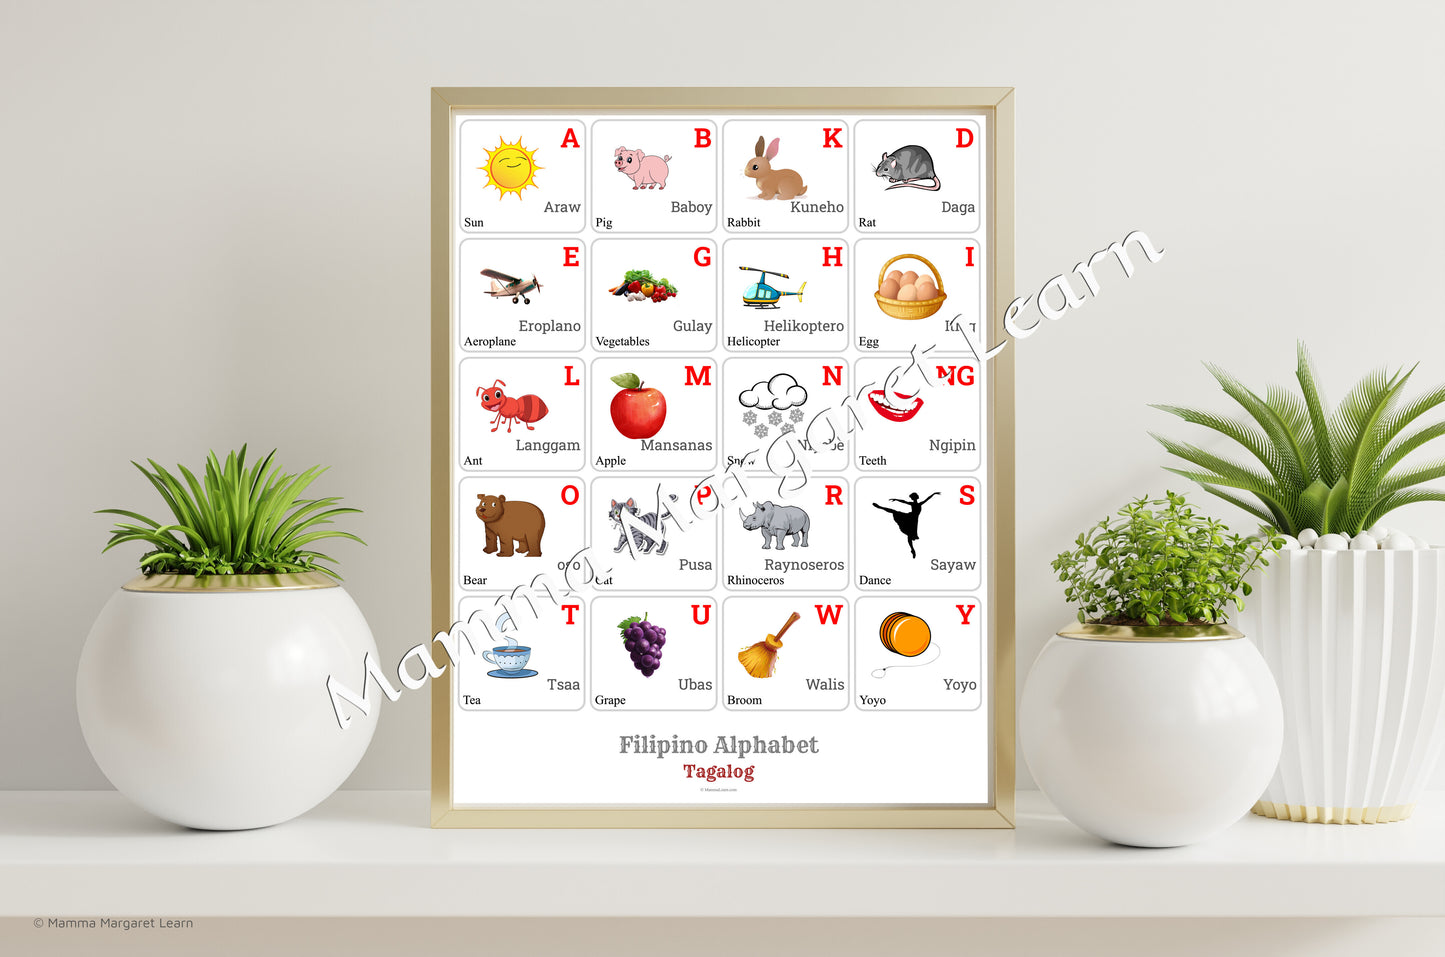 Tagalog Alphabet Poster | Chart, Colorful